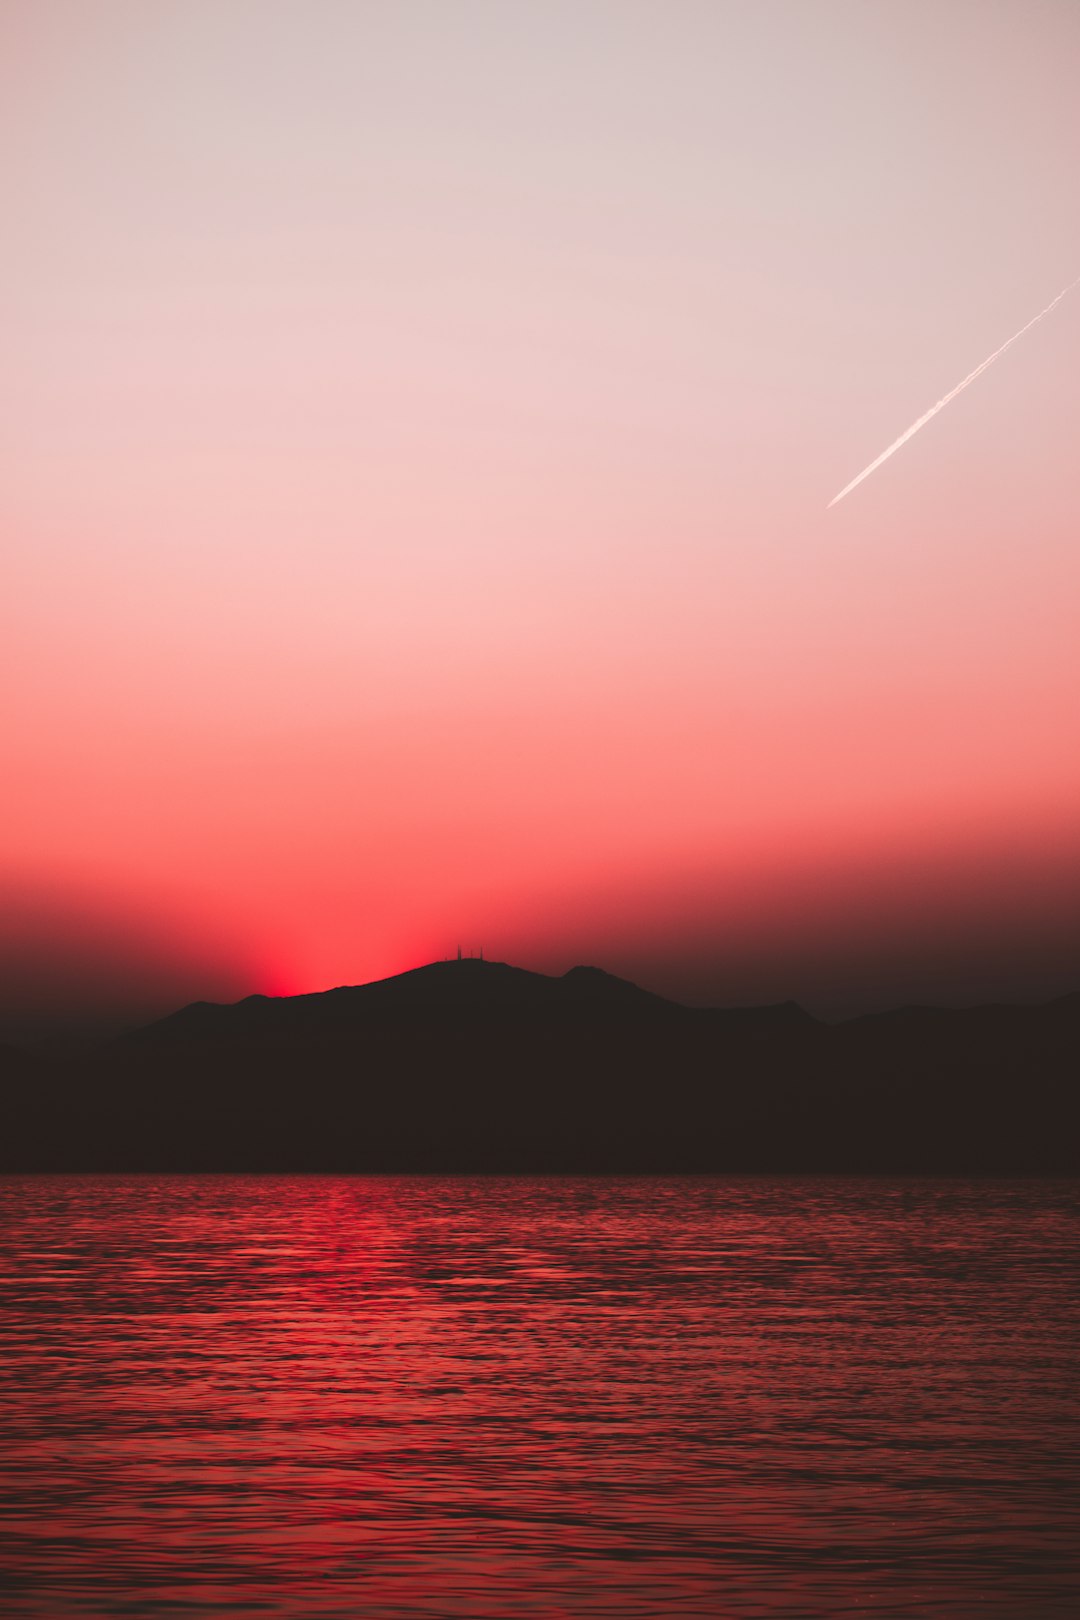 Red sky, distant islands and mountains, sunset, plane trail, calm sea surface, simple composition, minimalist style, wideangle lens, distant view, silhouette effect, soft light, tranquil atmosphere. in the style of minimalist. –ar 85:128